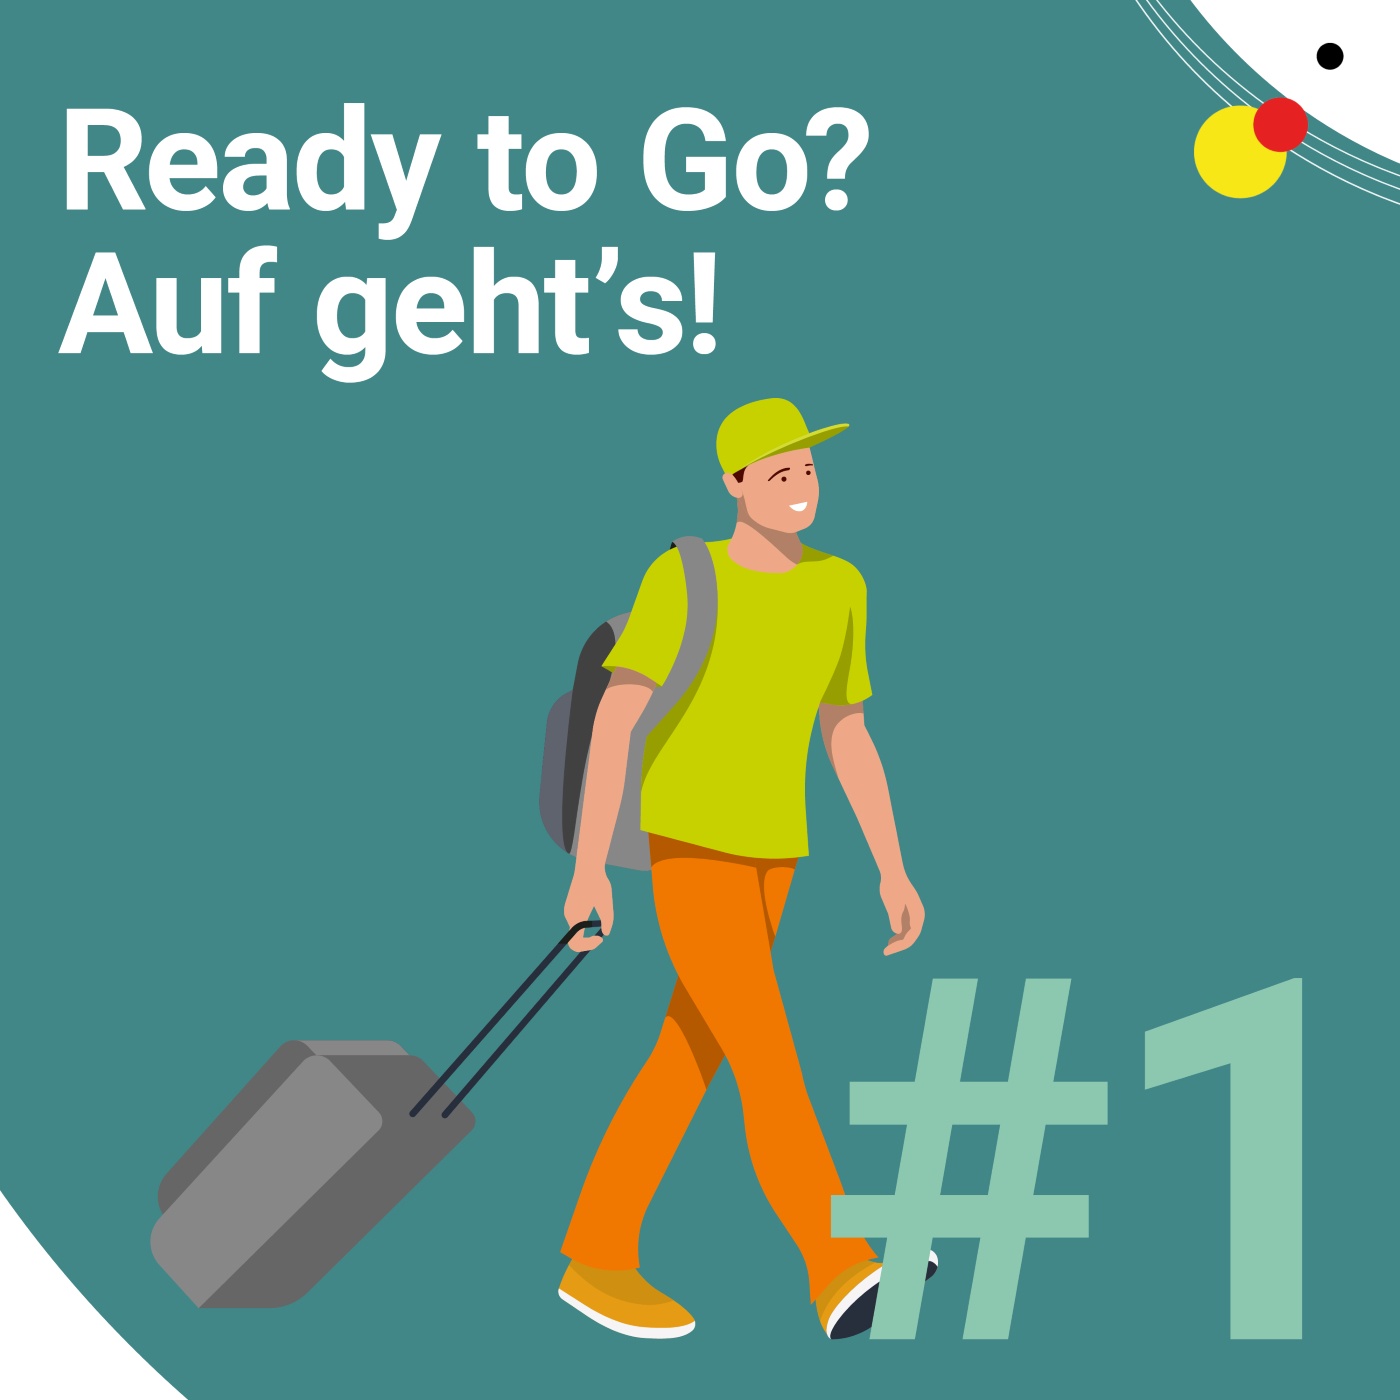 #1 Ready to Go? Auf geht’s! - Basic requirements for working in Germany